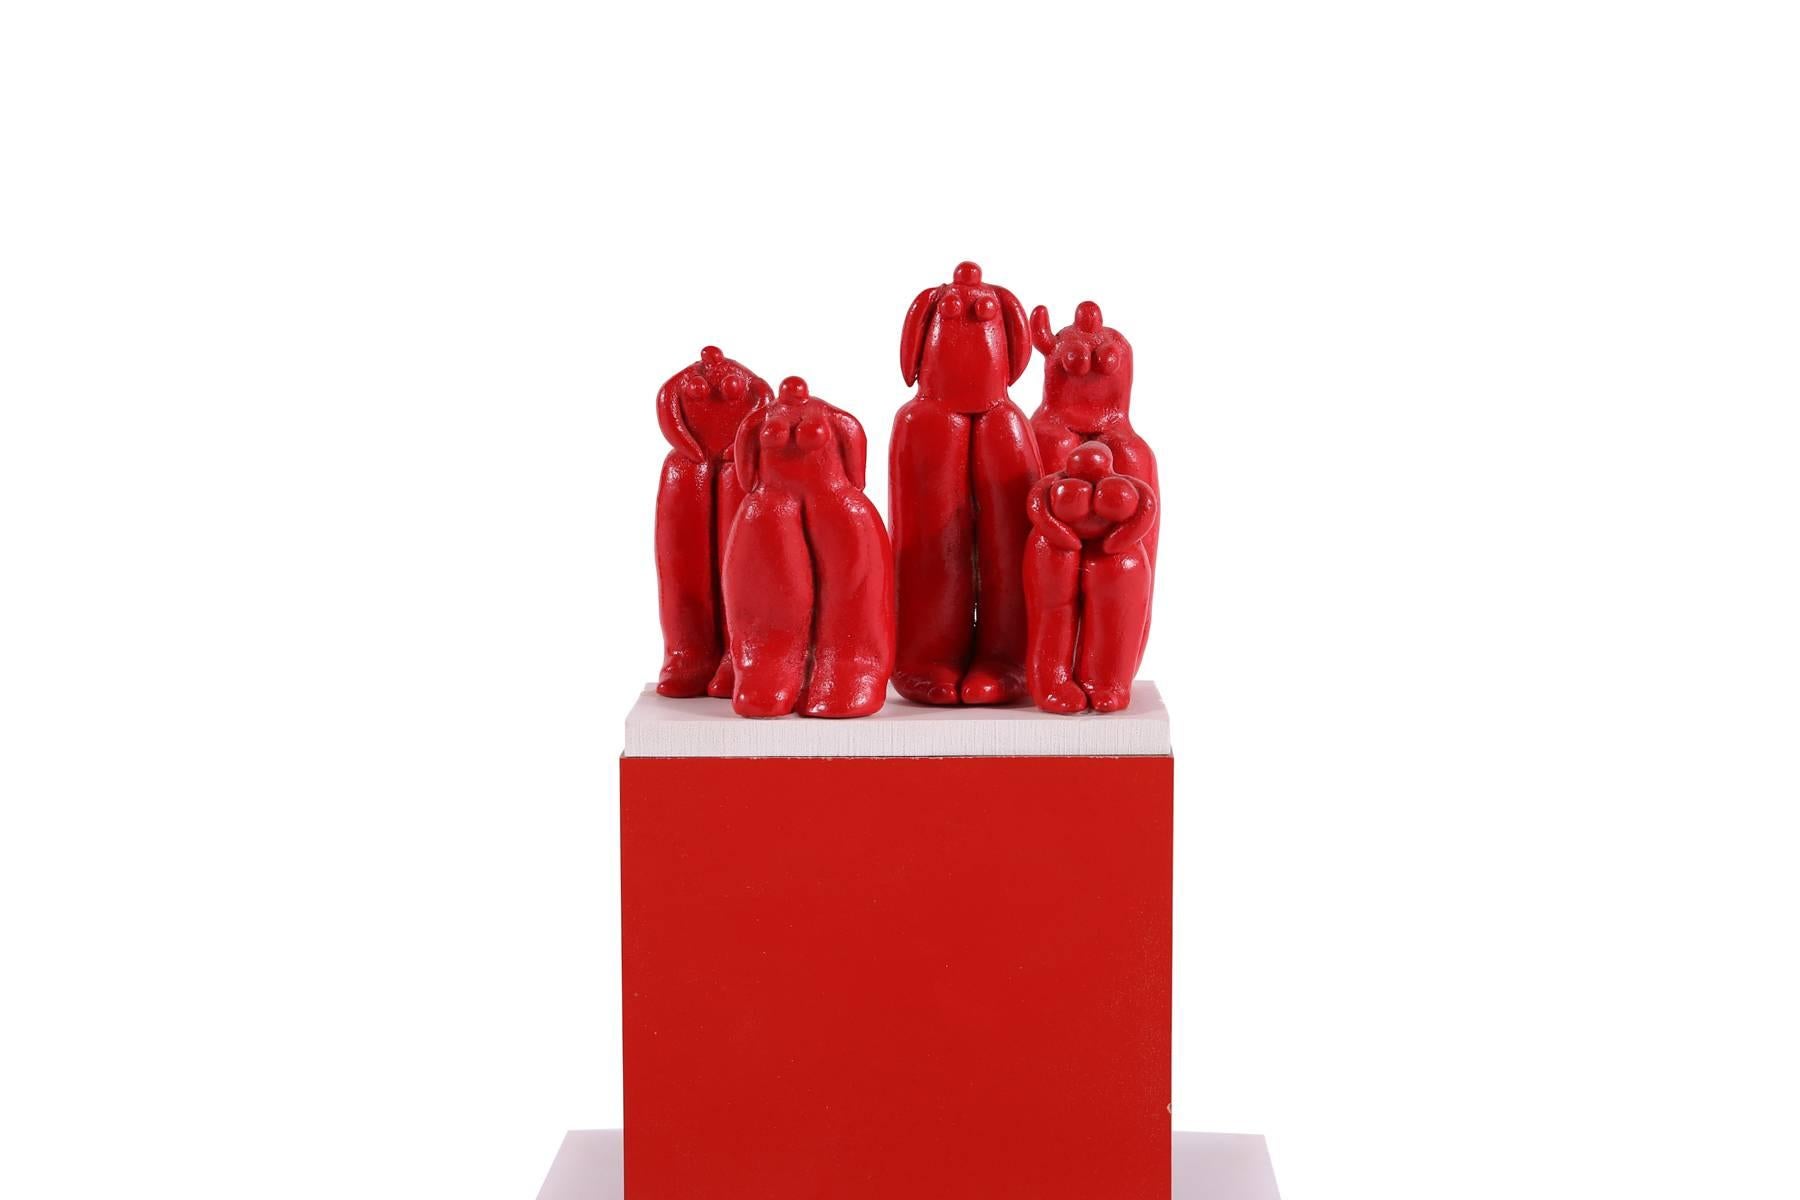 Dick Seeger mixed-media sculpture, circa early 1970s. This example blends ceramic hand-painted figures on mixed media pedestals that Seeger created himself.